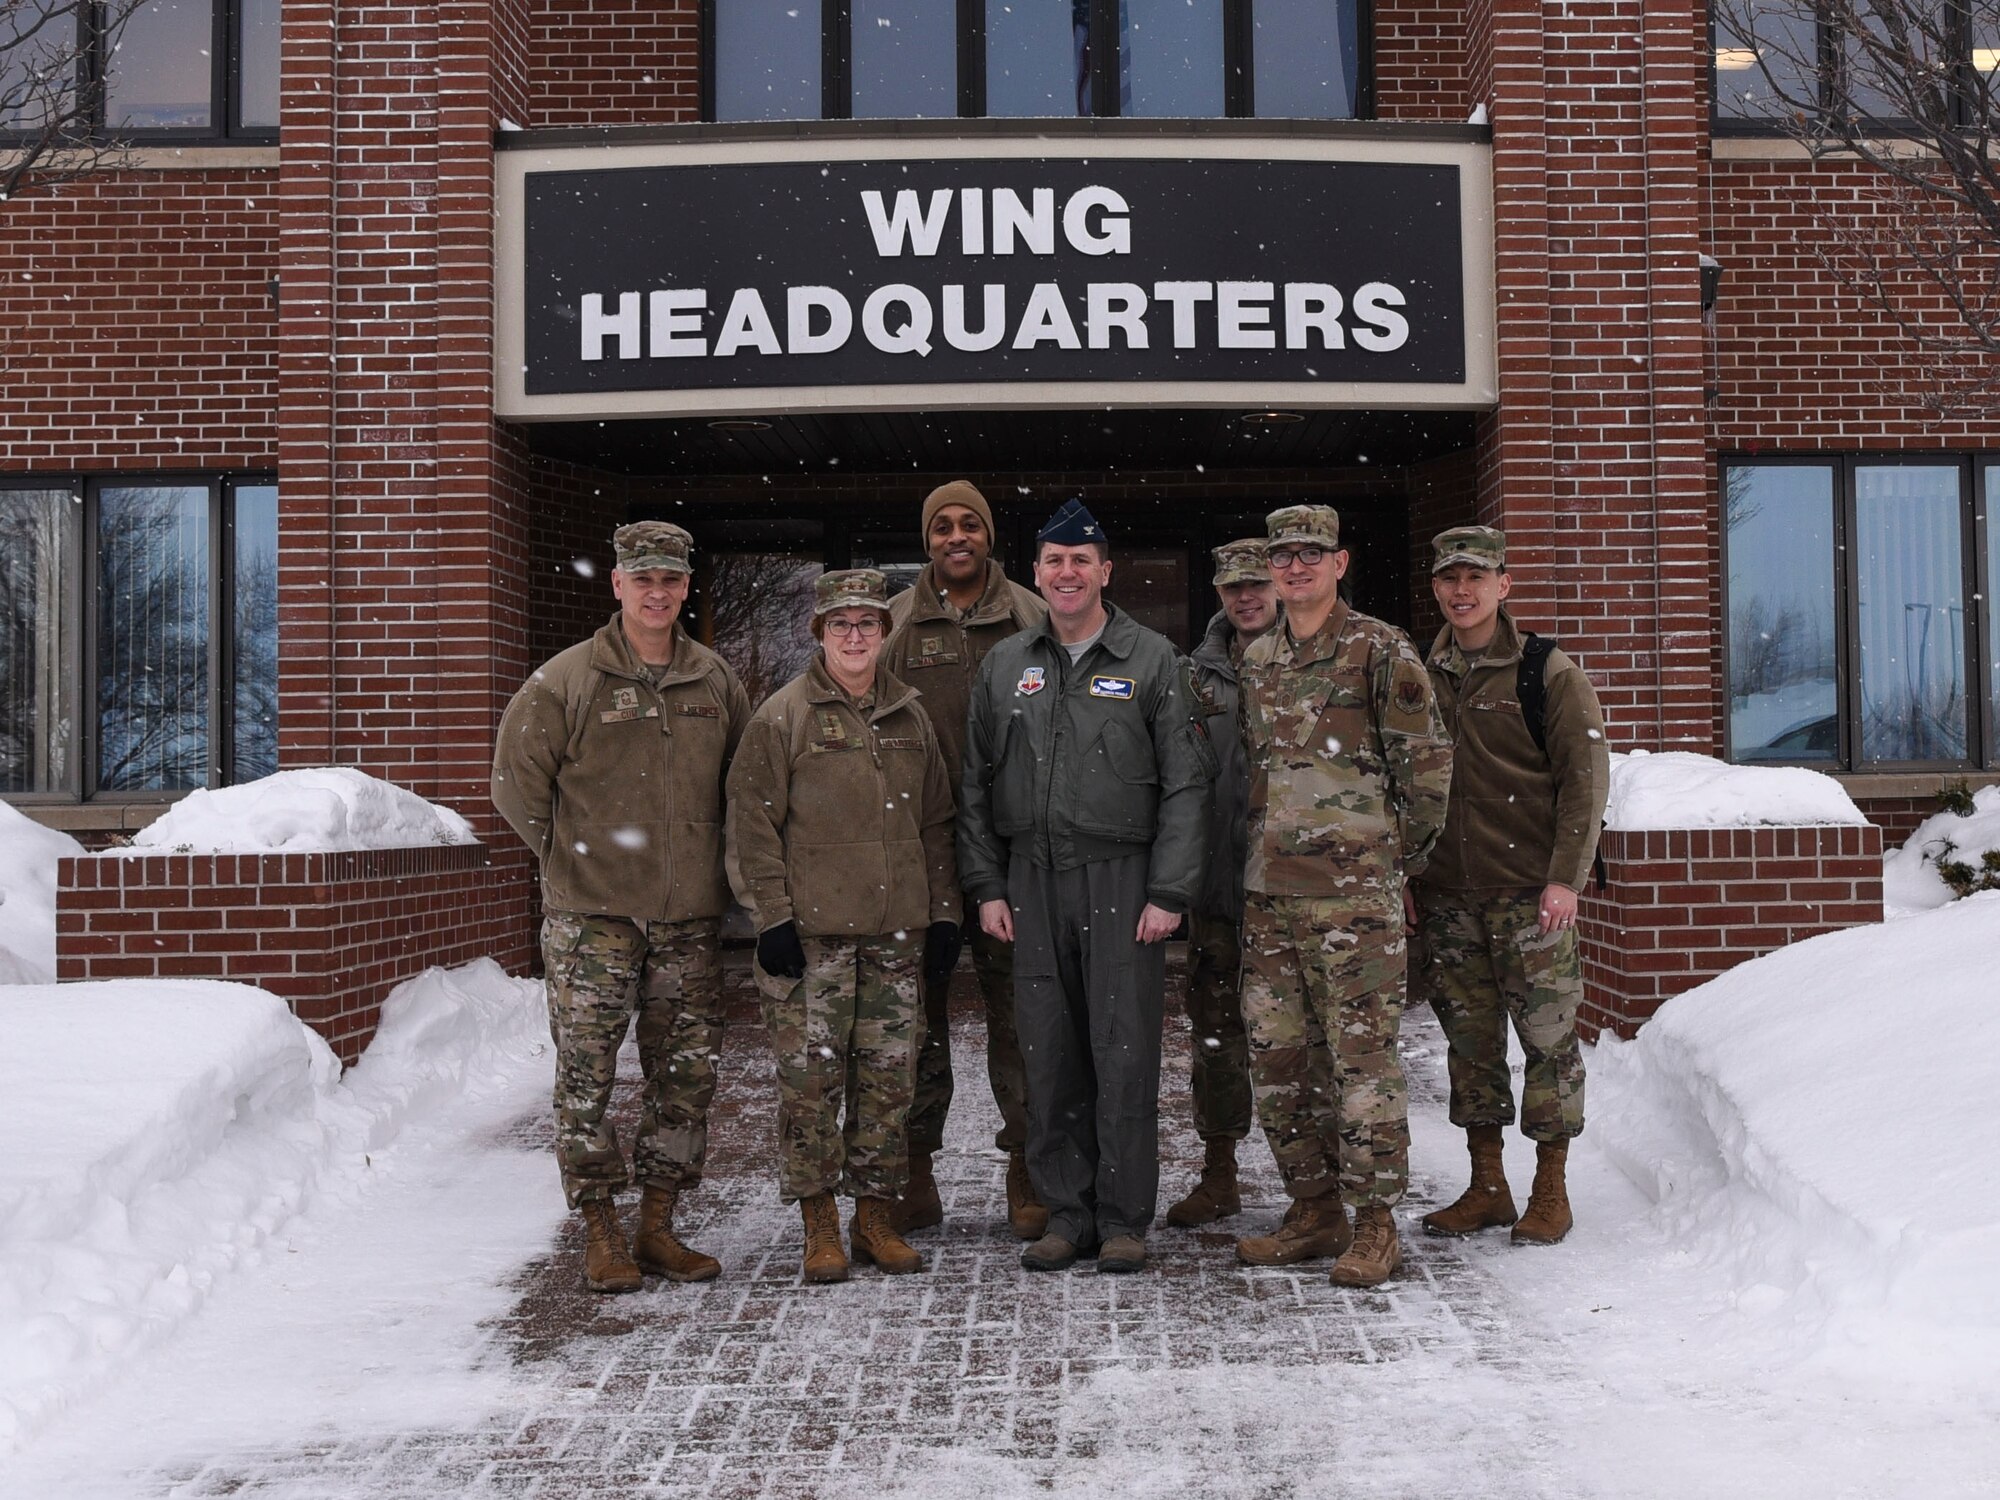 Chief Master Sergeant George Cum, far left, Chief of Medical Enlisted Force, Lt. Gen. Dorothy A. Hogg, second from left, Air Force Surgeon General, and their team, pose for a photo with 319th Reconnaissance Wing leadership at Grand Forks Air Force Base, N.D., Jan. 27, 2020. Hogg and her team were briefed on the 319th Reconnaissance Wing mission, and visited Grand Forks as part of their northern tier base tour. (U.S. Air Force photo by Senior Airman Melody Howley)